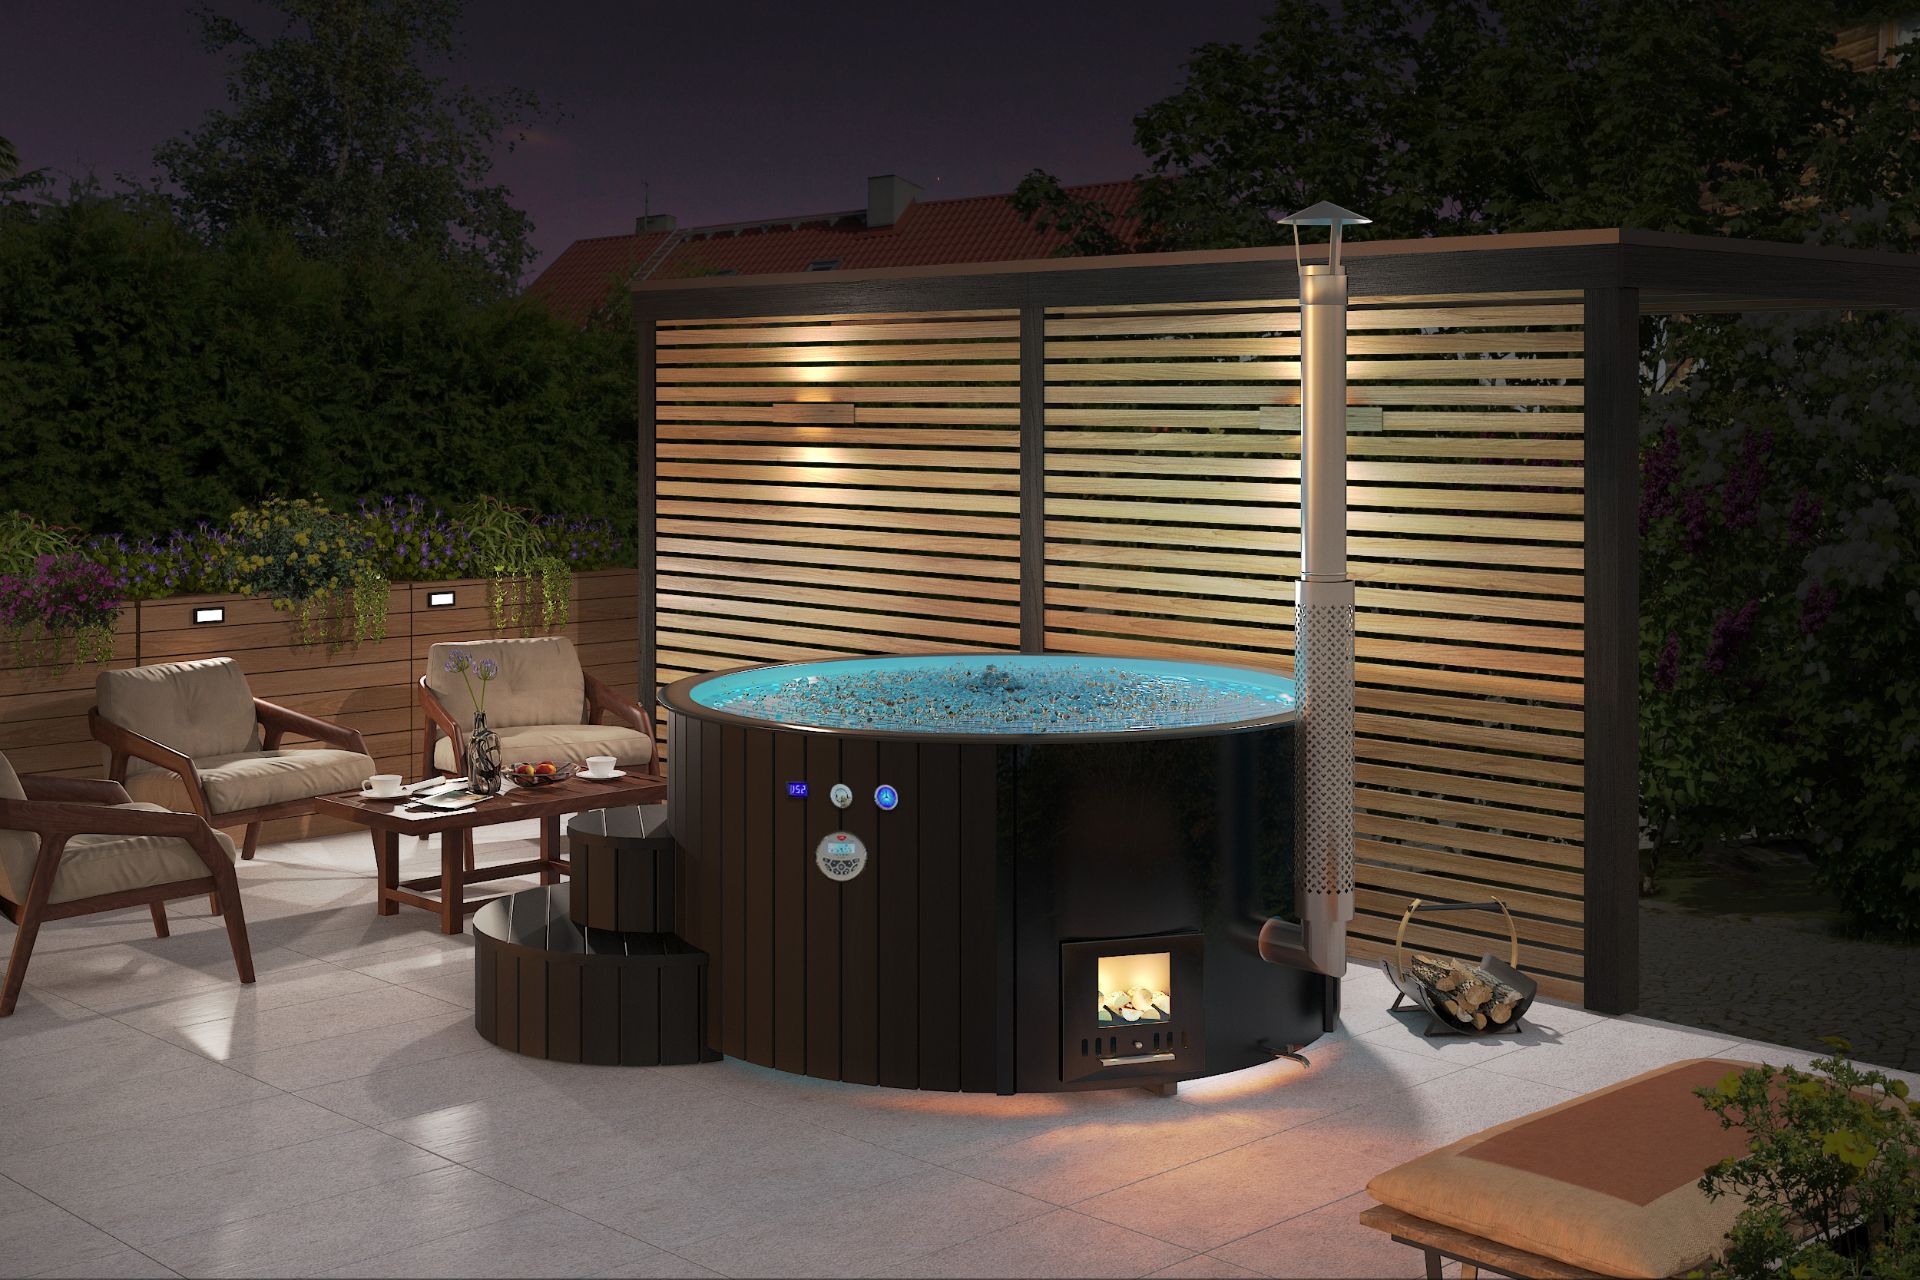 + VAT Brand New Deluxe 200 Hot Tub -Black Edition - 4/6 Person - 19mm Thickness - 200cm Diameter